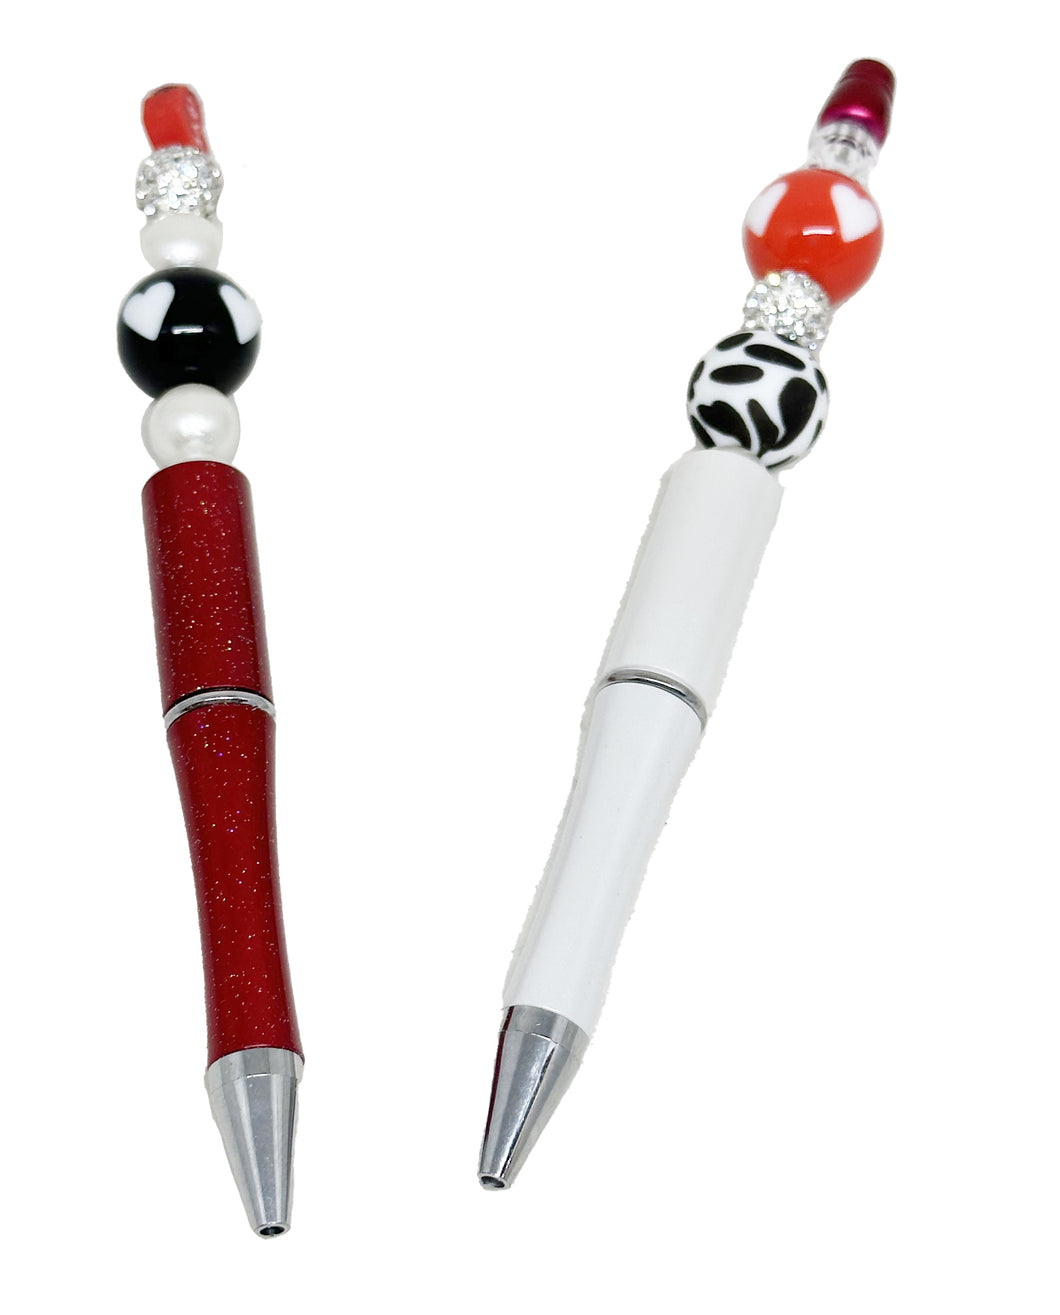 Red or white jewel ballpoint pen with black ink with pearls and pocket